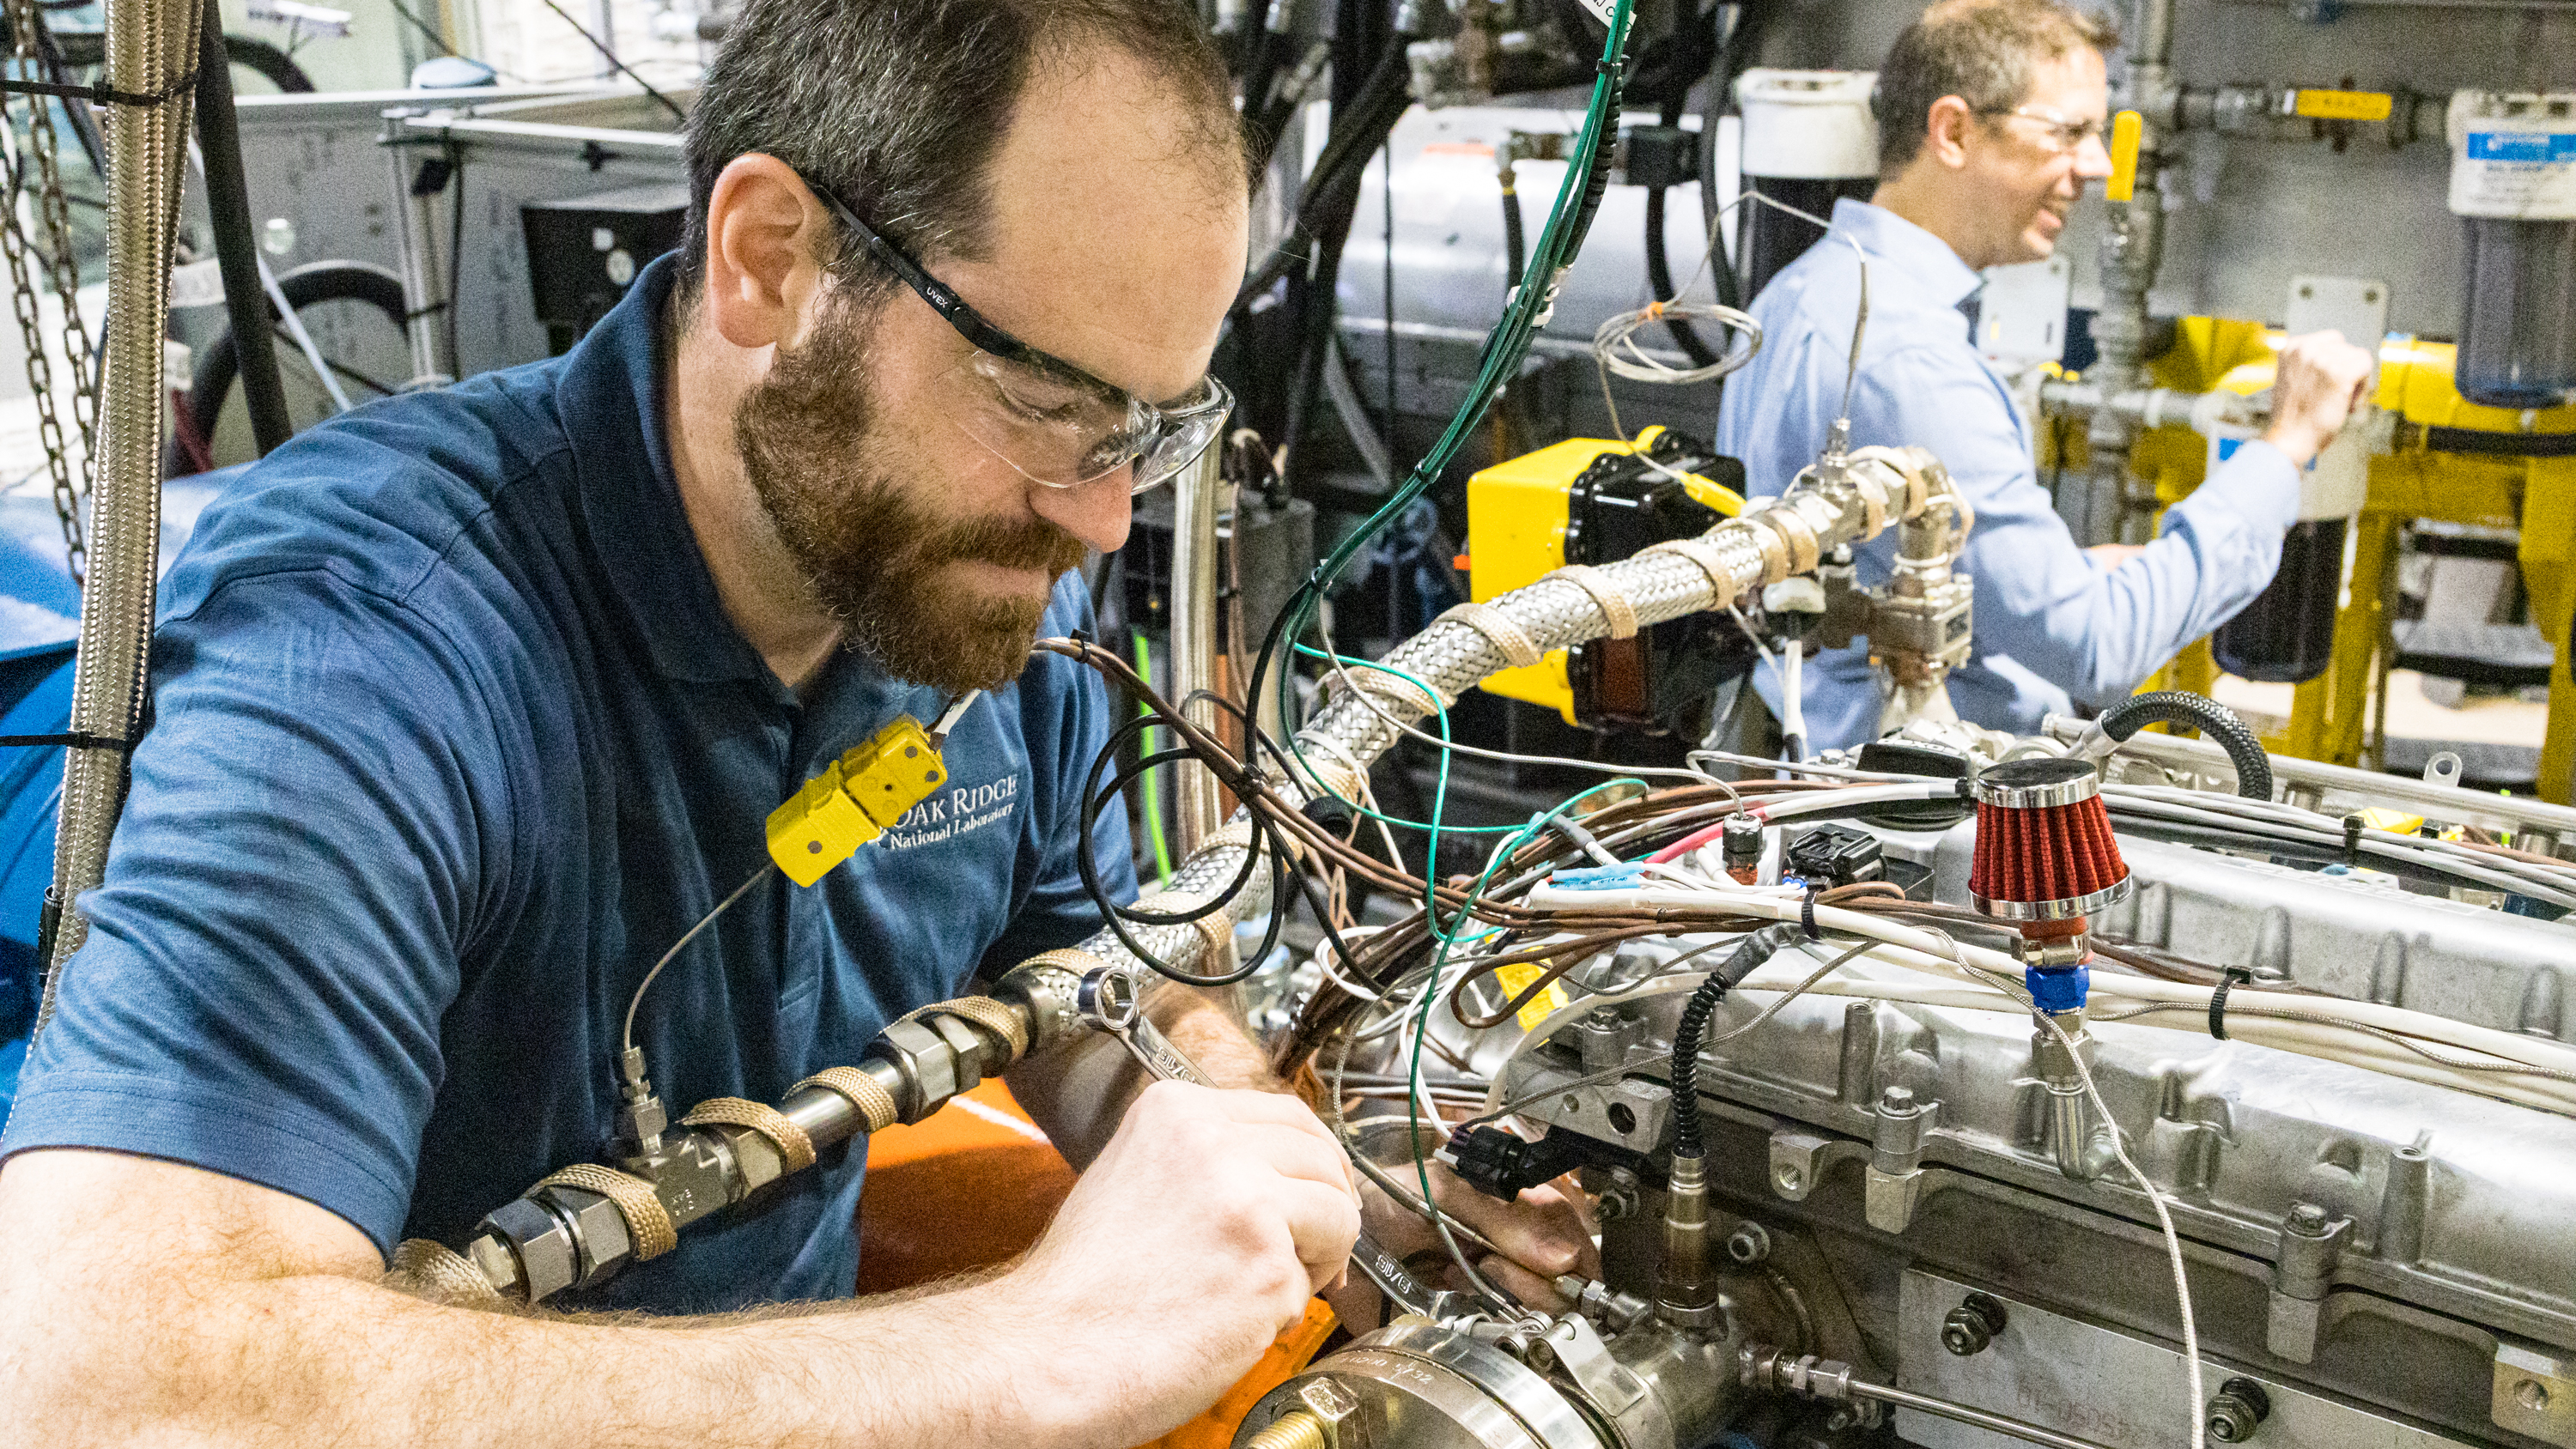 Fairbanks Morse Defense, ORNL collaborate on developing alternative fuel  technology for marine engines